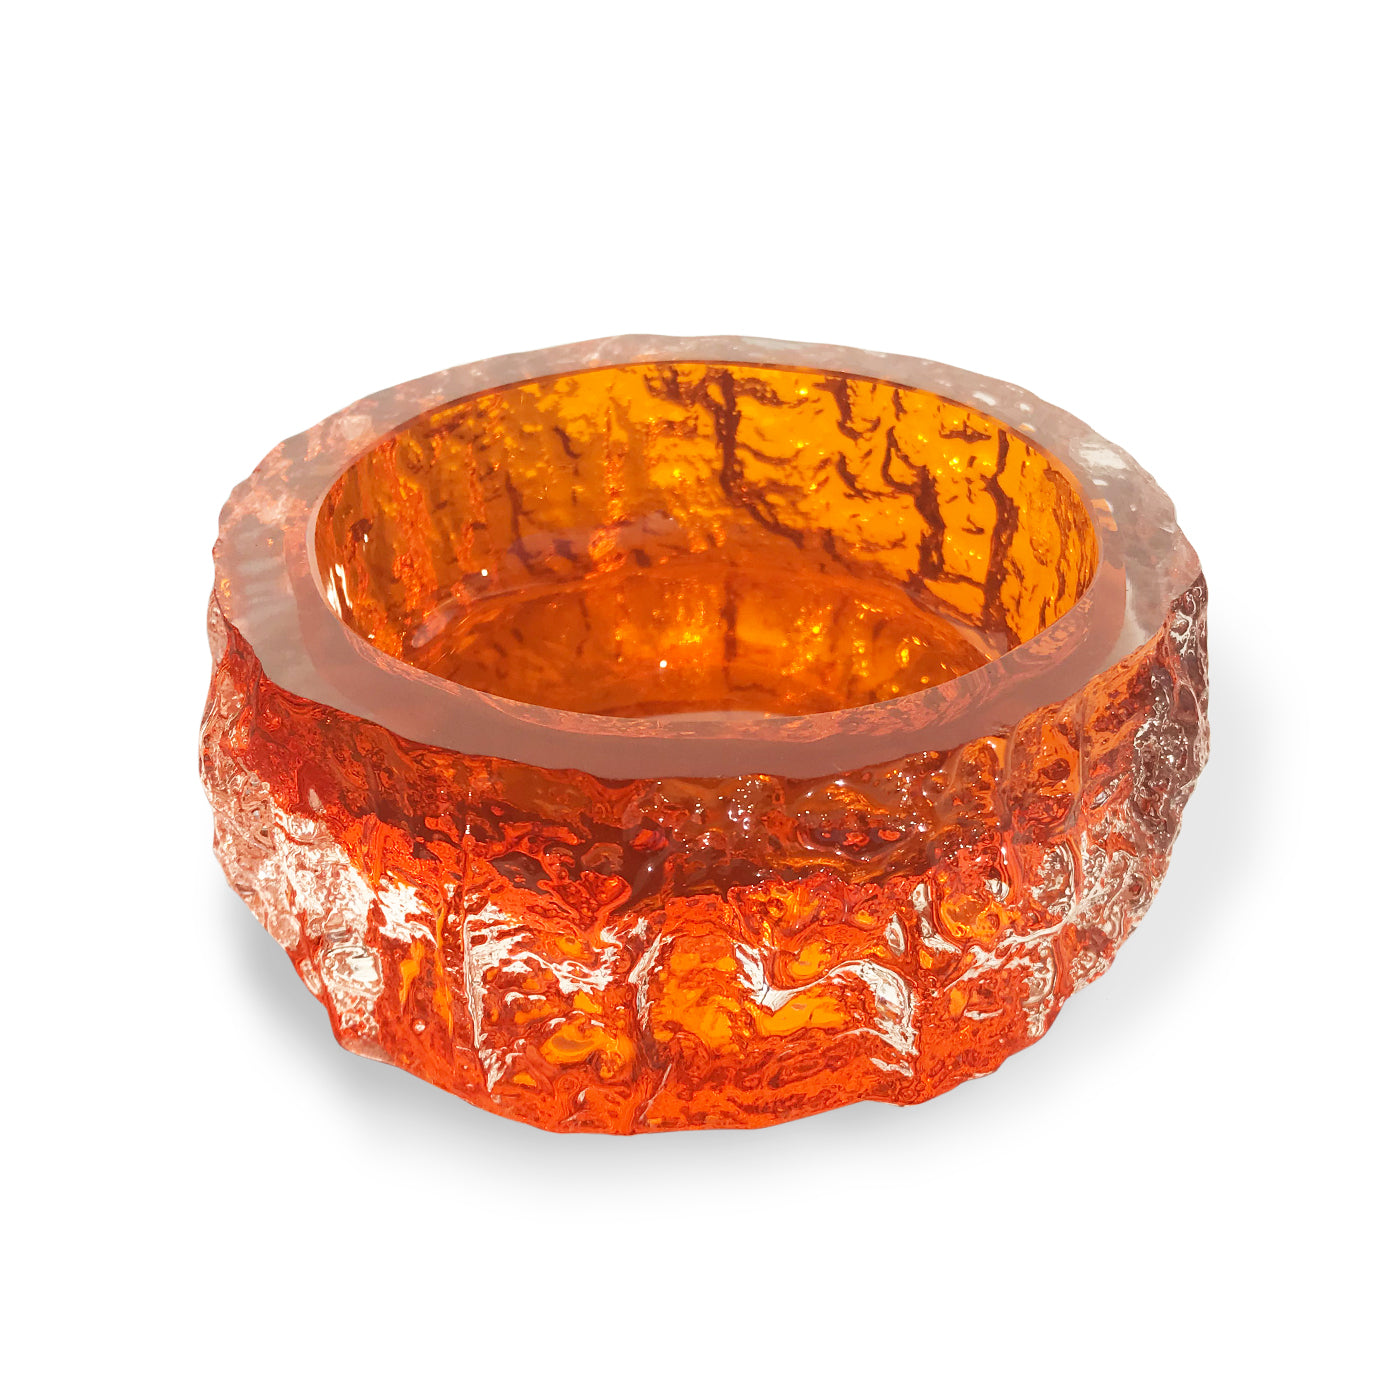 Whitefriars tangerine bark bowl, from the 'Textured' range, designed by Geoffrey Baxter - SHOP NOW - www.intovintage.co.uk